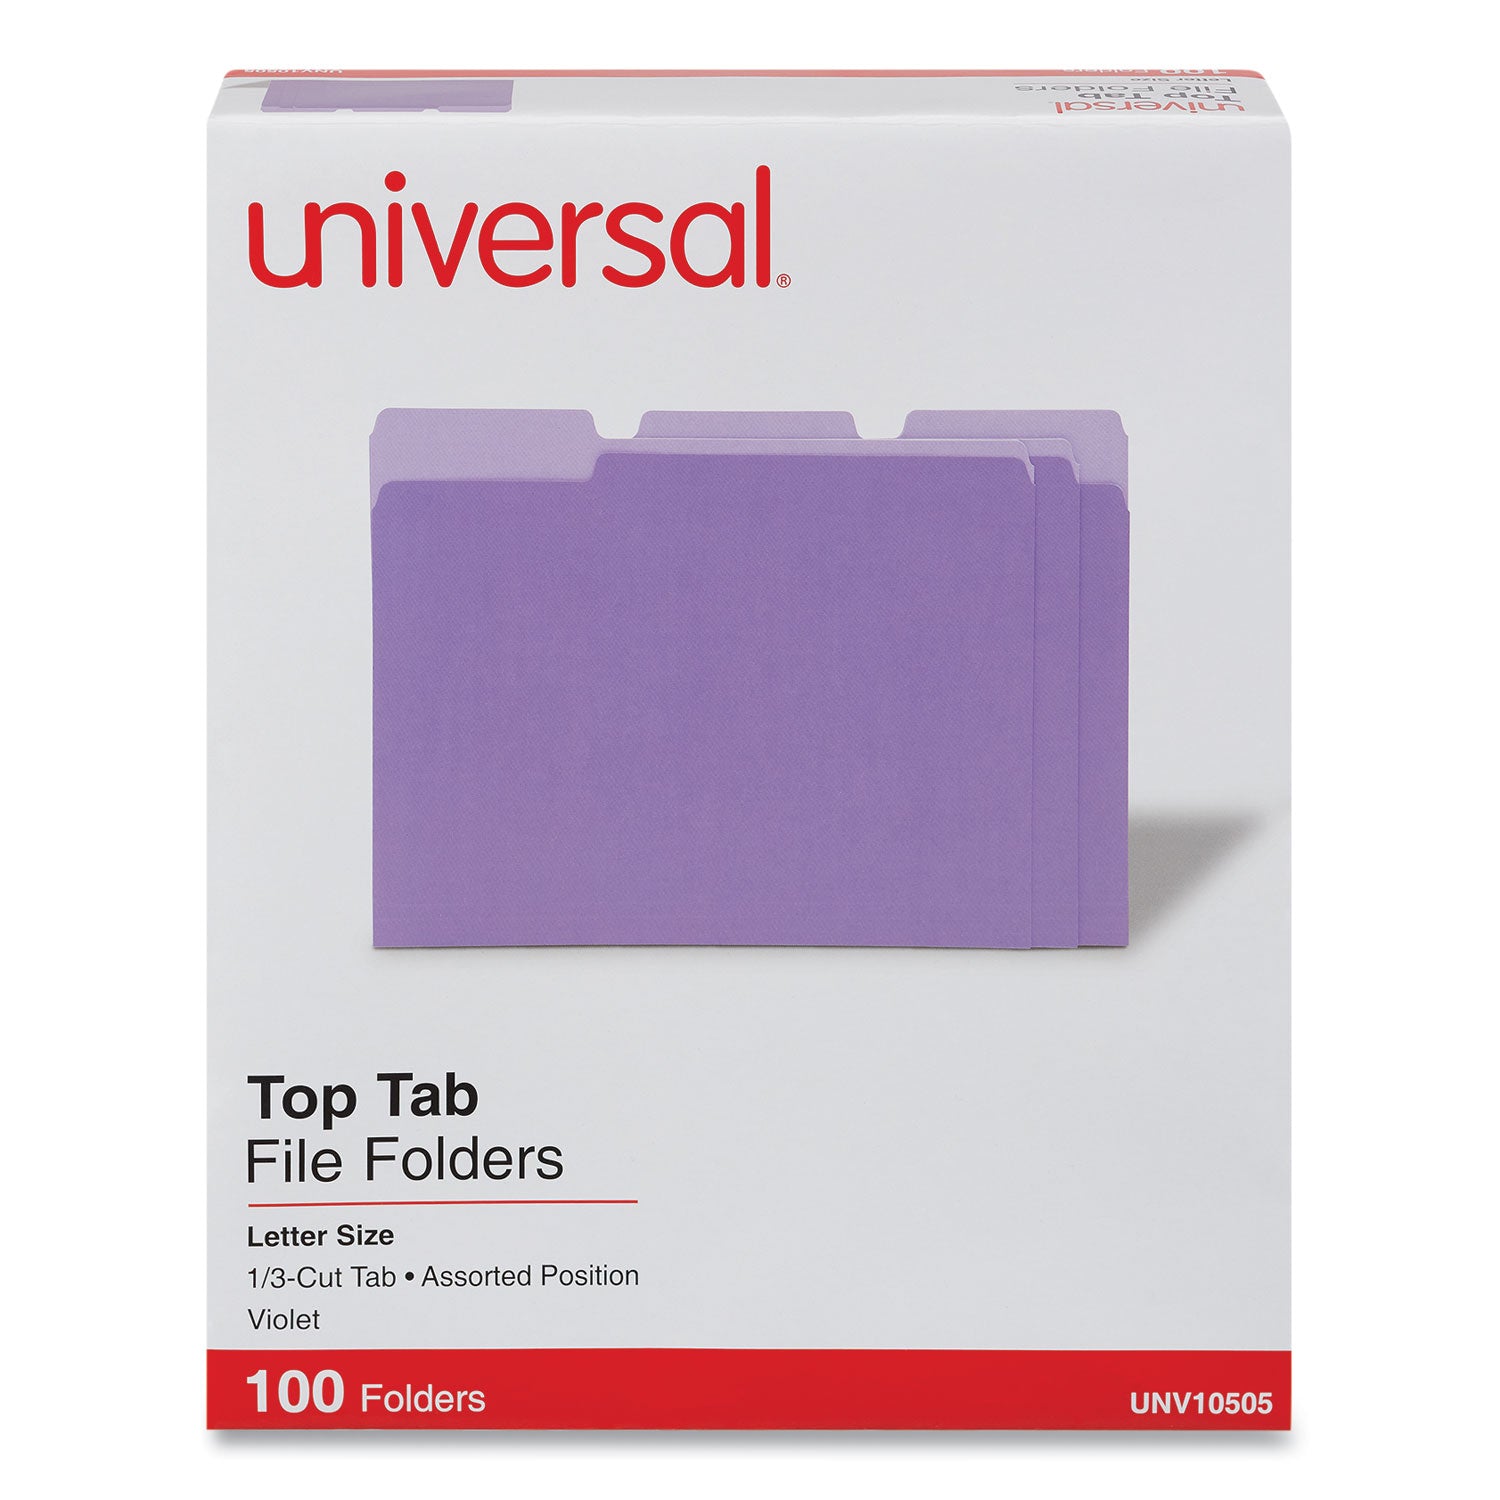 Deluxe Colored Top Tab File Folders, 1/3-Cut Tabs: Assorted, Letter Size, Violet/Light Violet, 100/Box - 